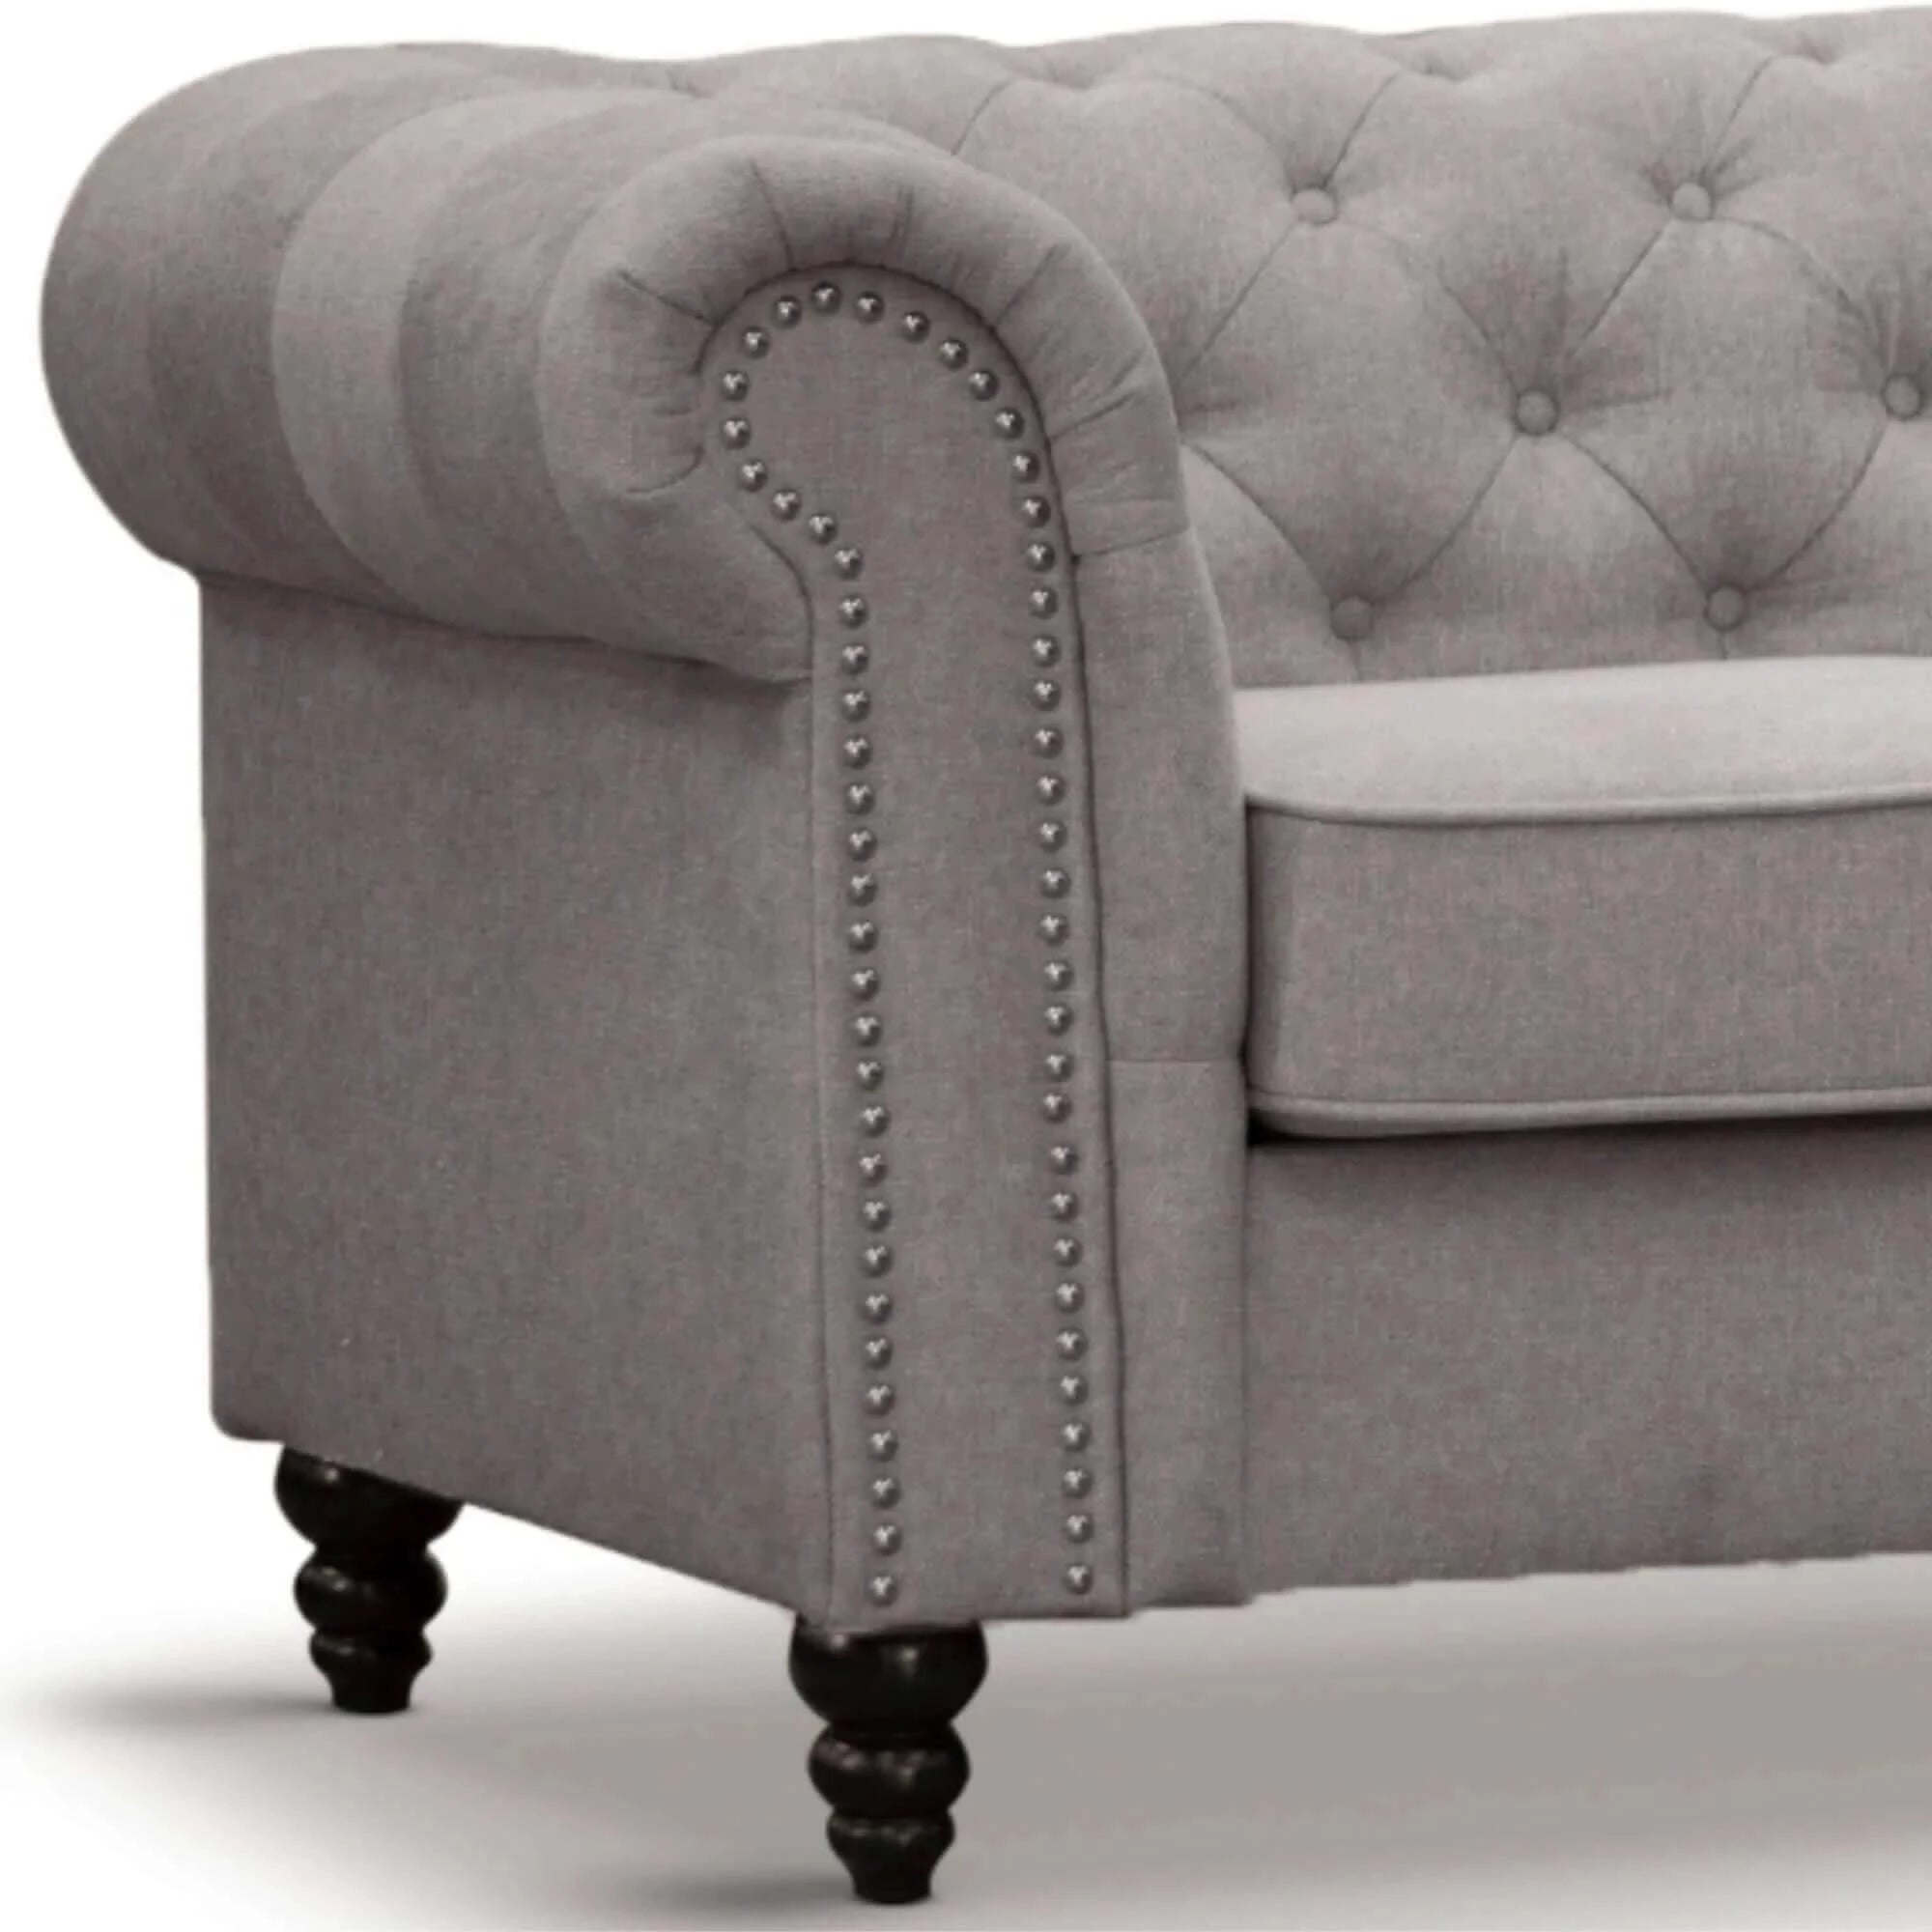 Buy mellowly 3 seater sofa fabric uplholstered chesterfield lounge couch - grey - upinteriors-Upinteriors